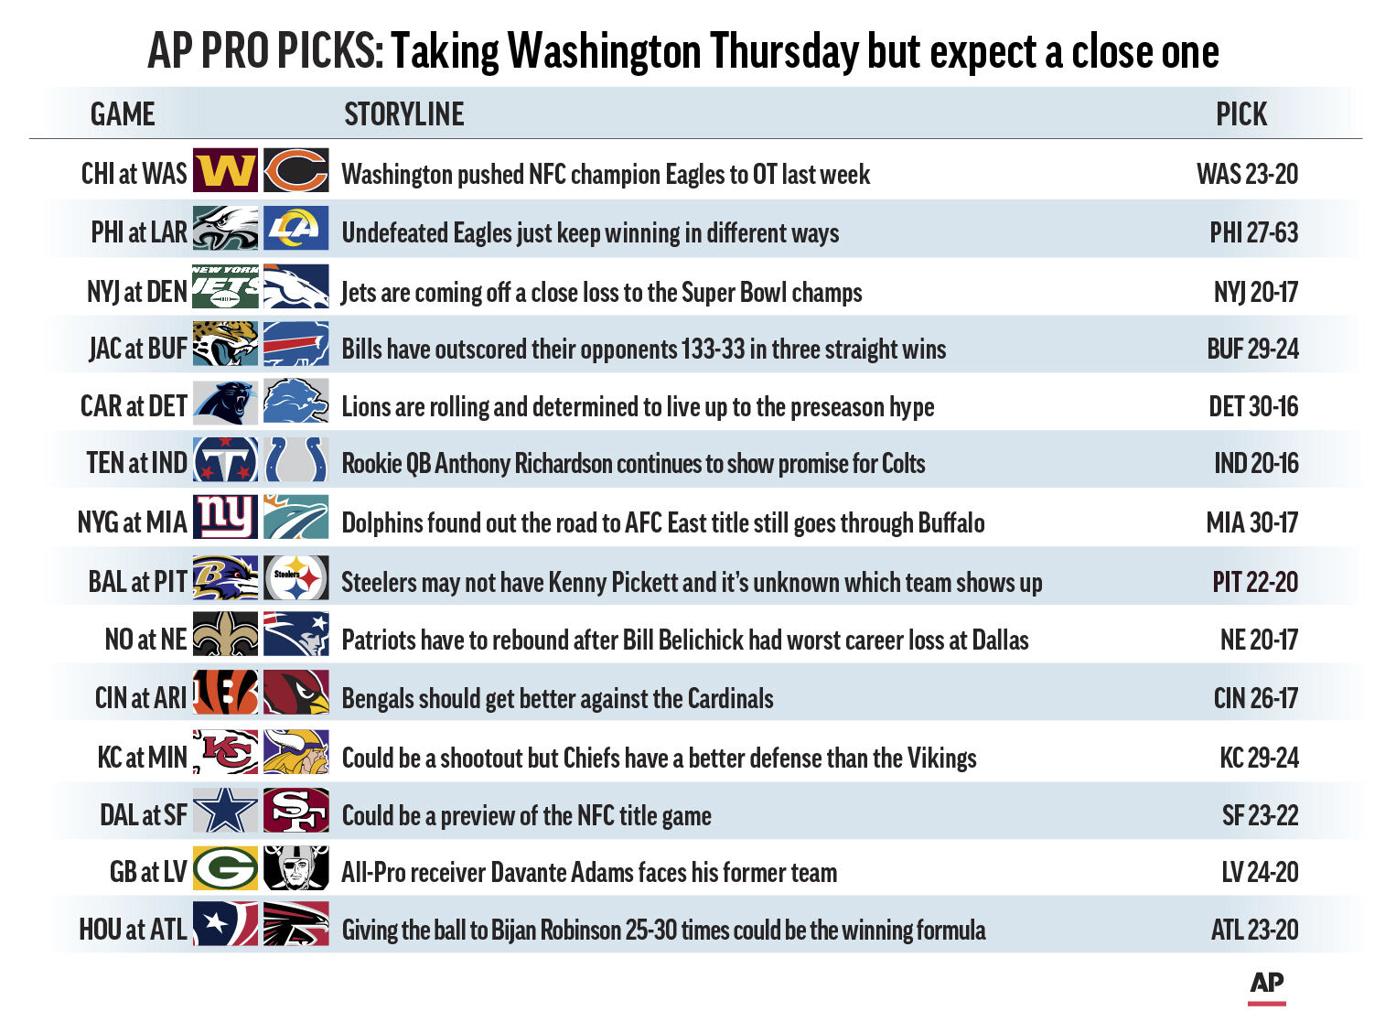 Washington prepares for Sunday's NFC Matchup with an extensive